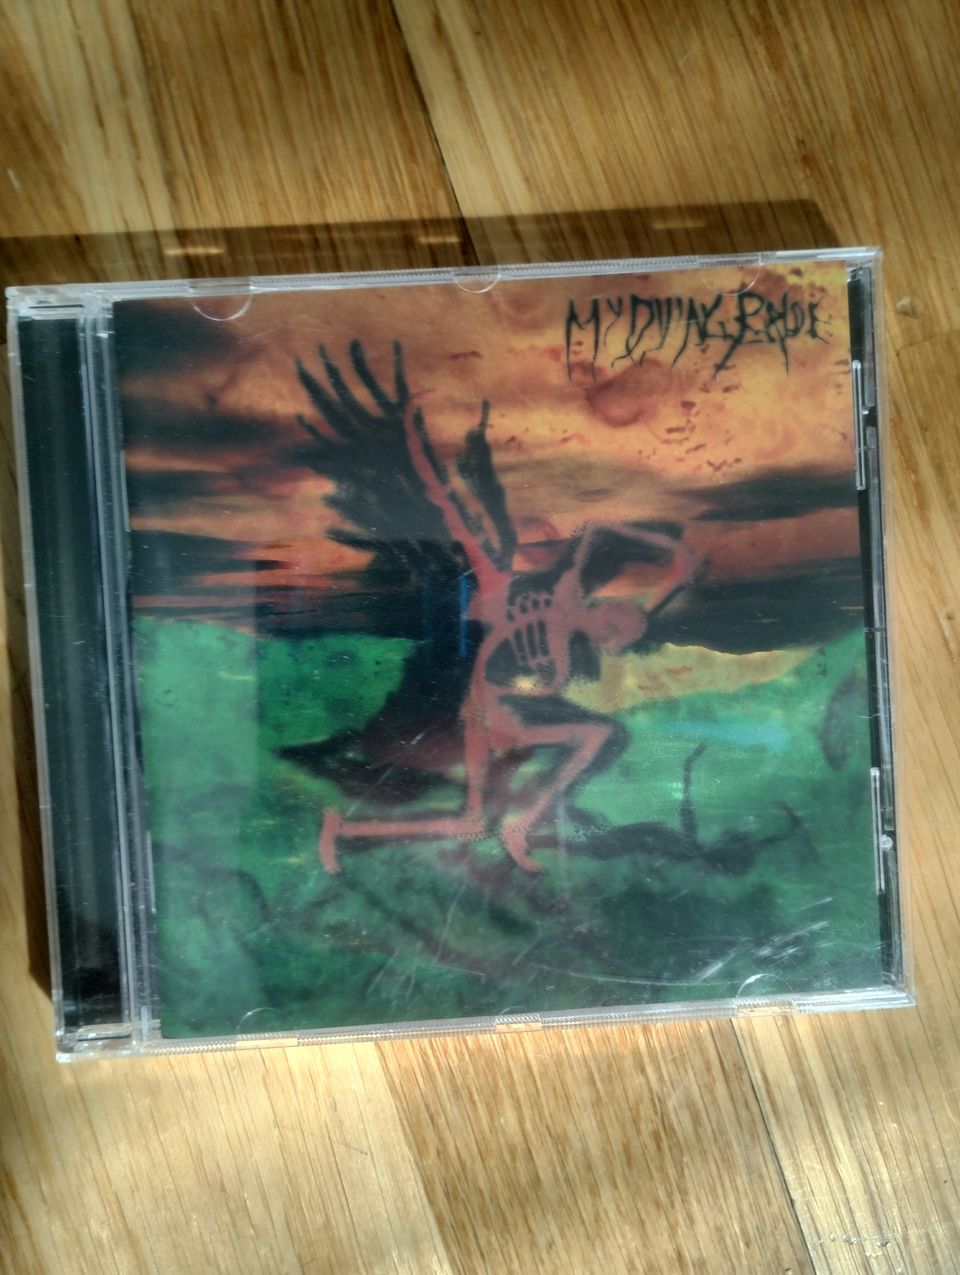 My dying Bride dreadful hours